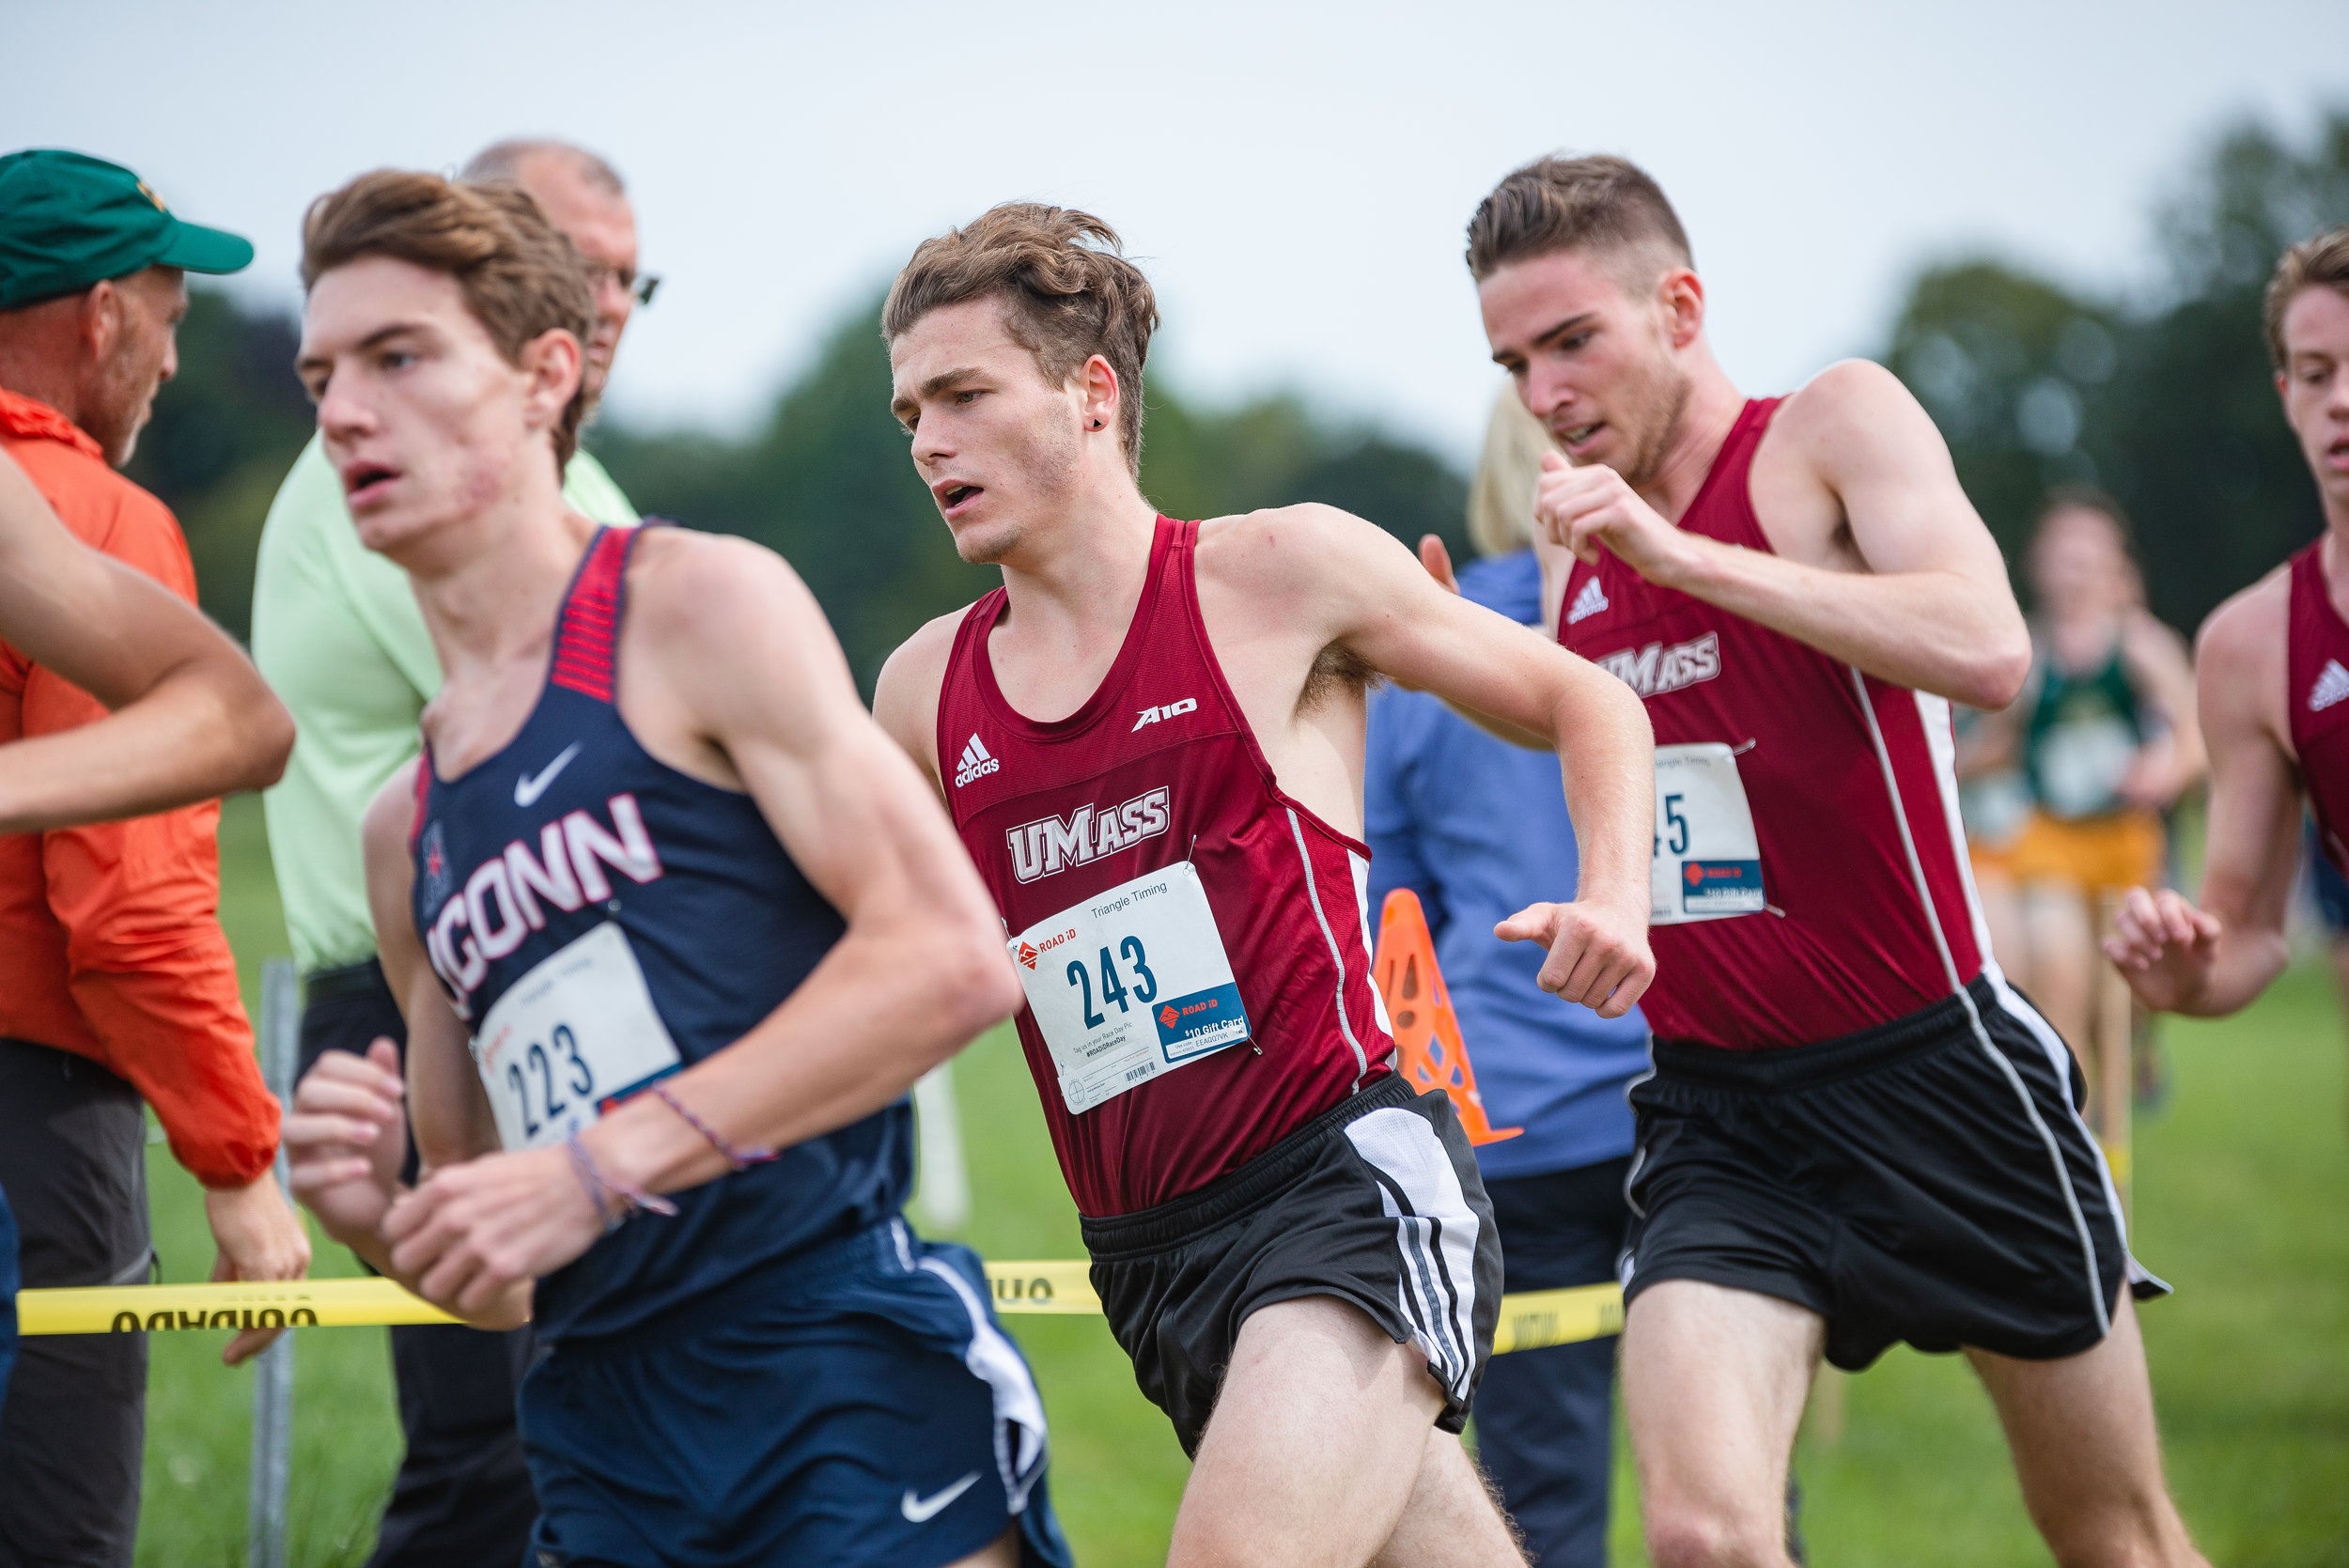  UMass Men's and Women's Cross Country opened the season with the Minuteman Invitational on Saturday, Sept. 8, 2018, at the UMass Cross Country Course in Amherst. Competing schools included UMass, UConn, and UVM. (Photo by Judith Gibson-Okunieff) 